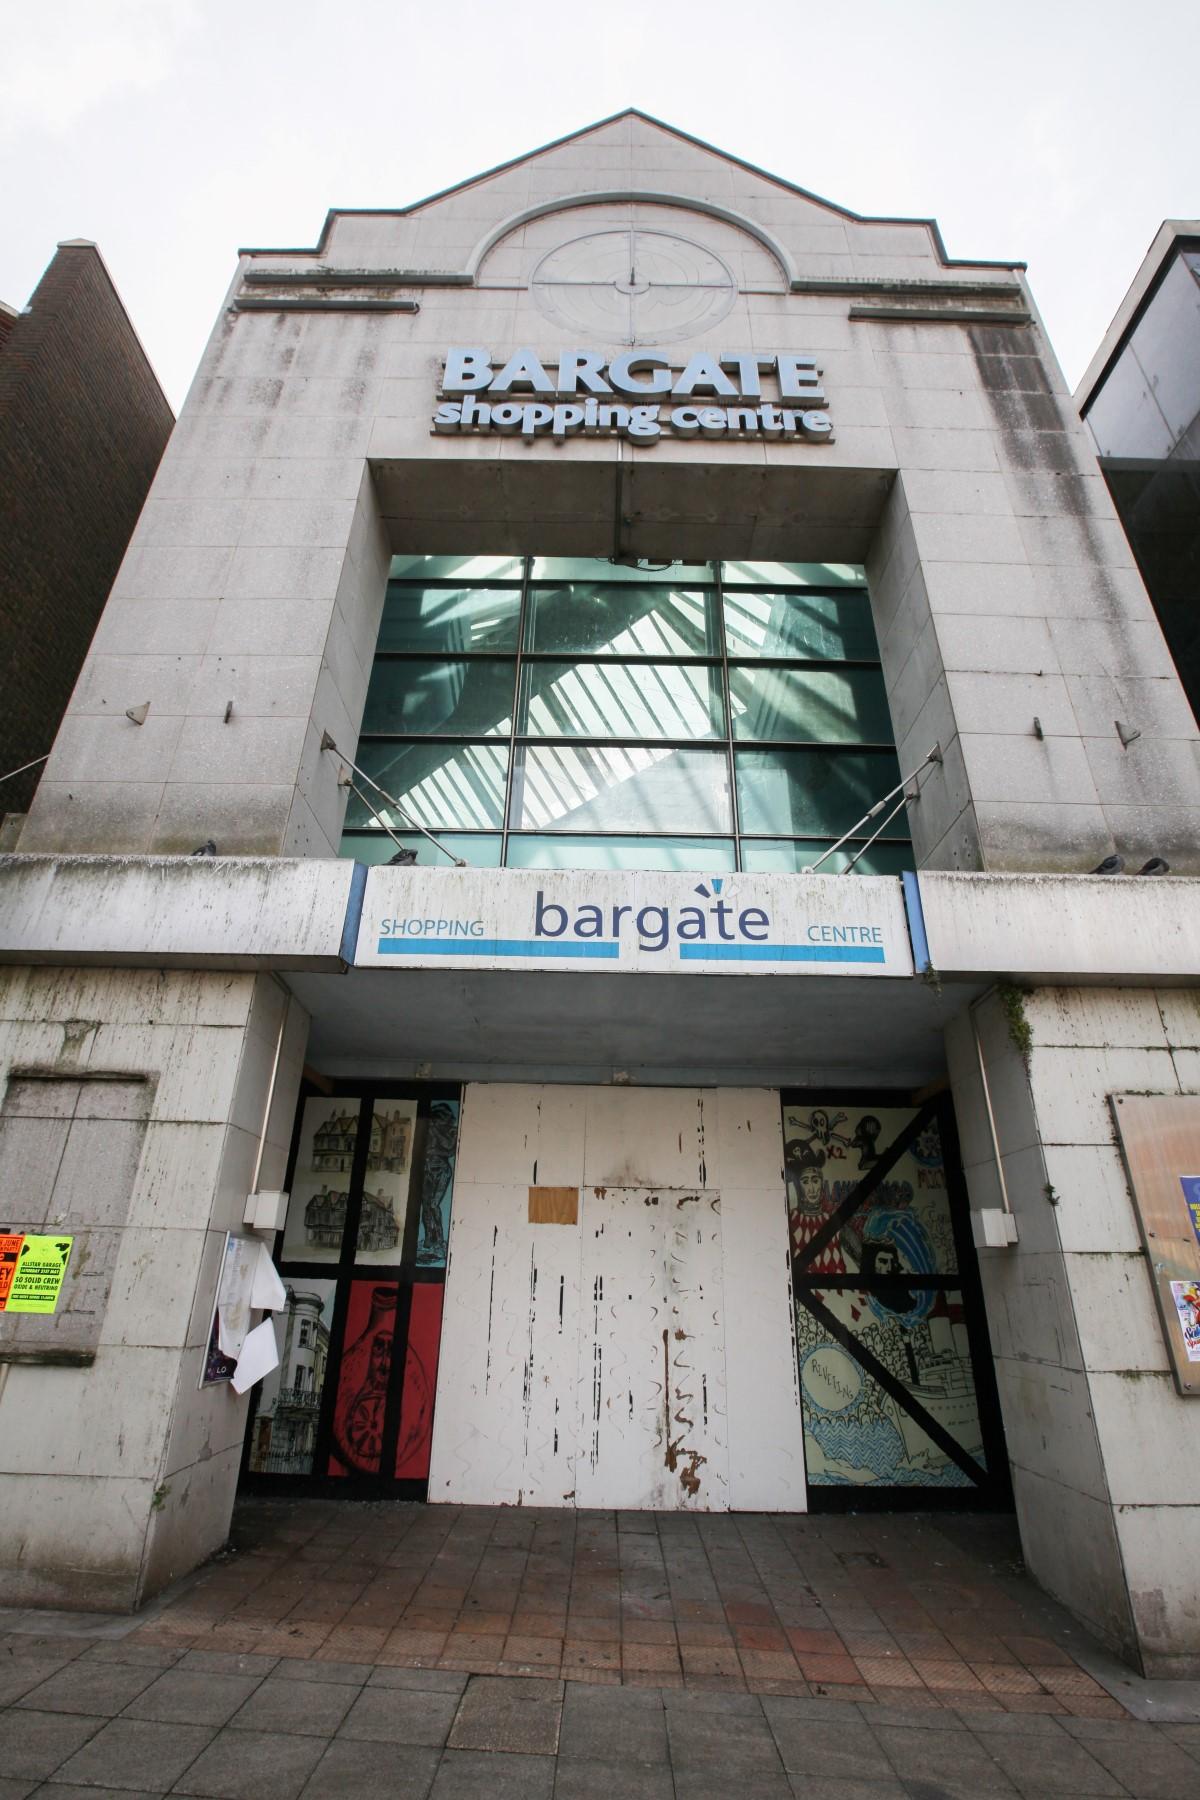 Outside the derelict Bargate shopping centre